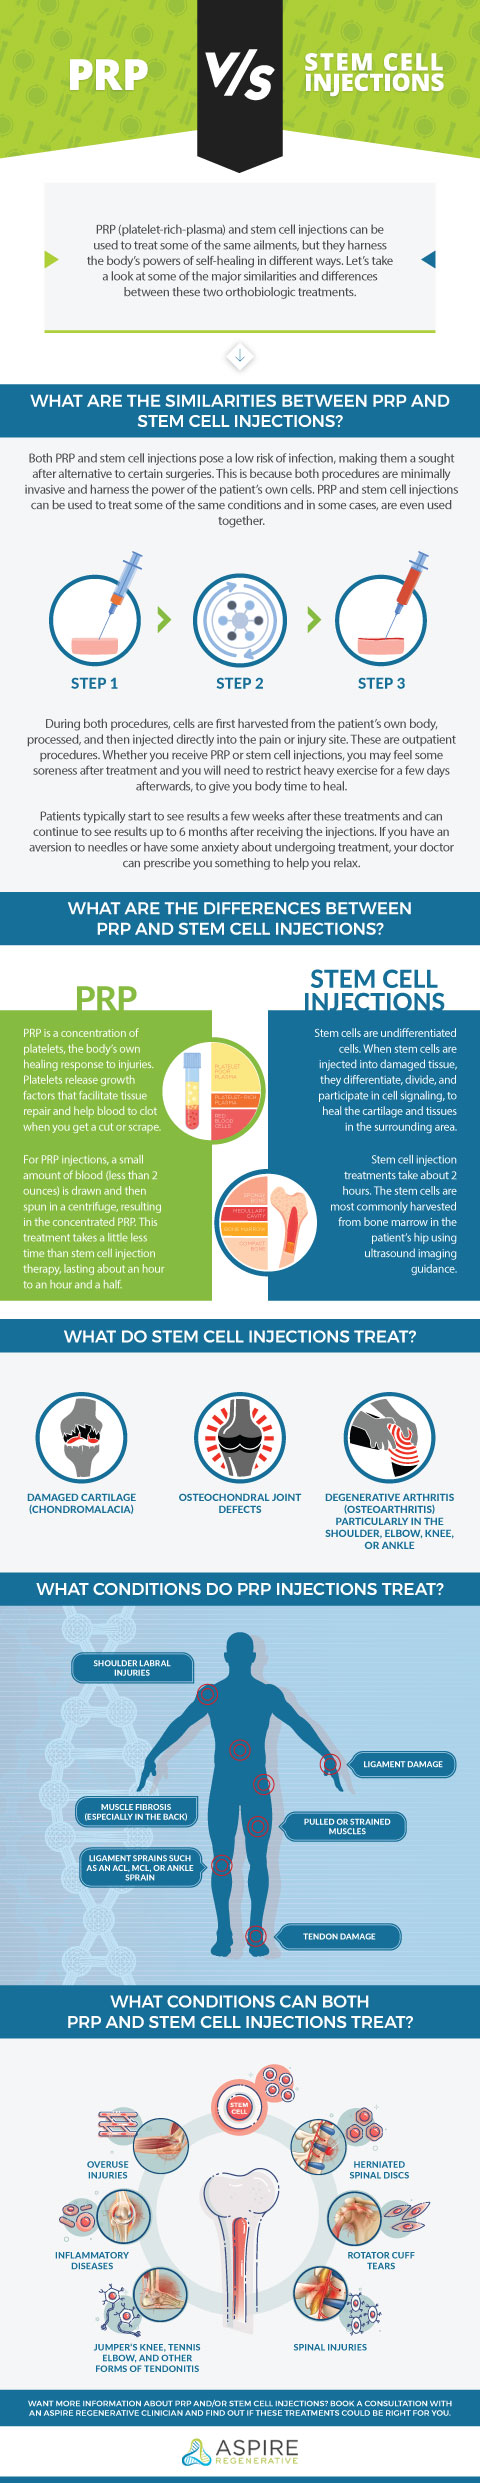 PRP vs. Stem Cell Injections